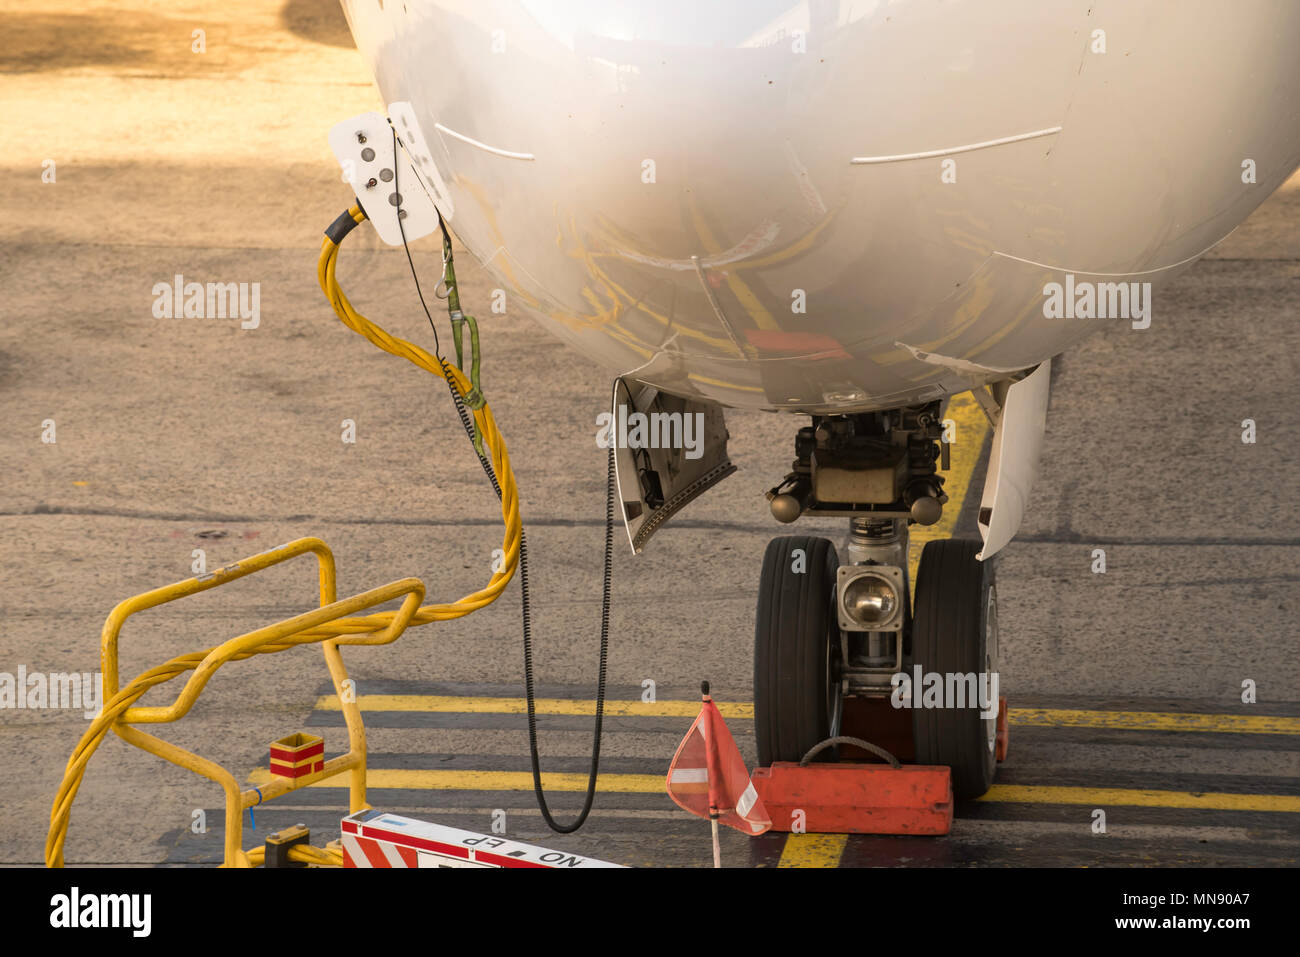 Close up of cables connected to a parked commercial aircraft at an airport in Australia Stock Photo